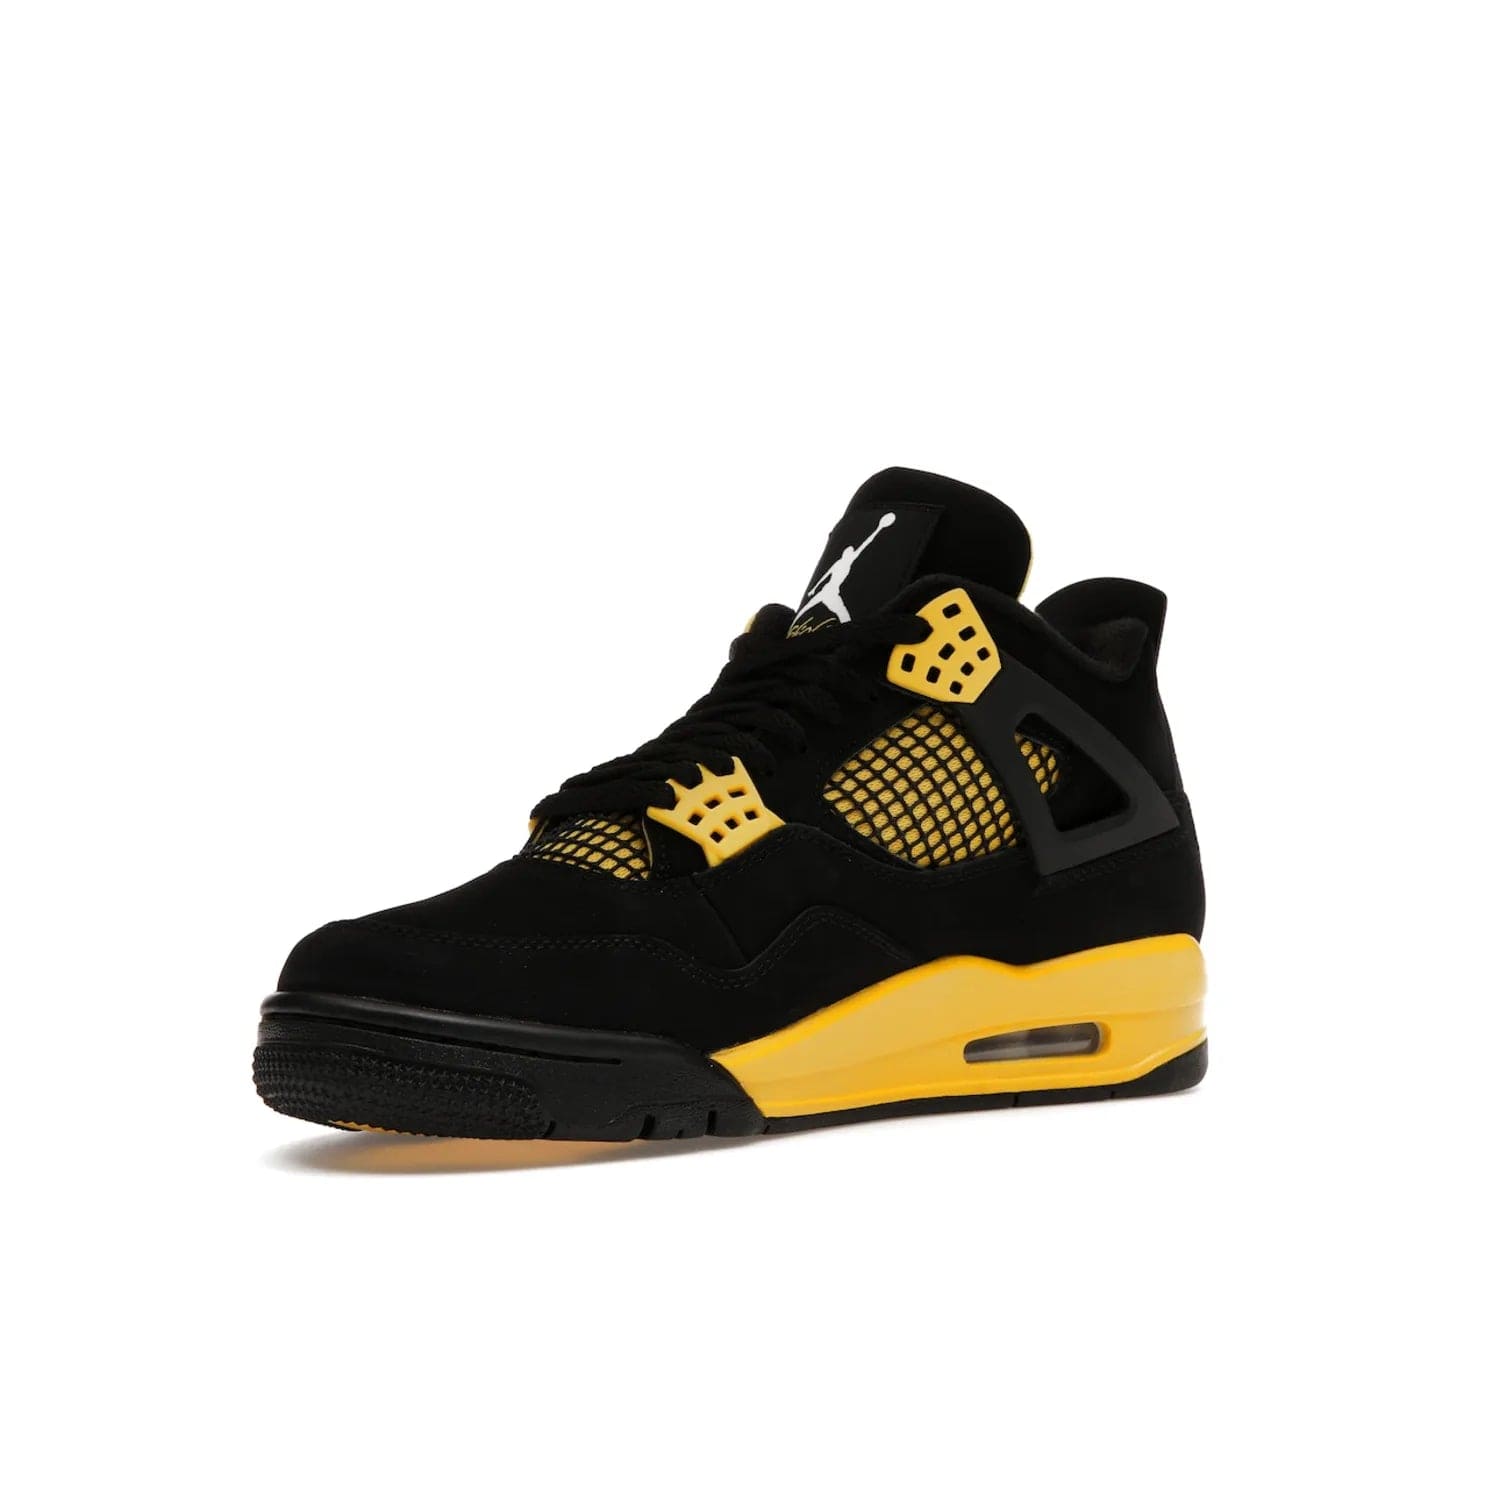 Jordan 4 Retro Thunder (2023) - Image 15 - Only at www.BallersClubKickz.com - Iconic Air Jordan 4 Retro Thunder (2023) returns with black nubuck upper and Tour Yellow details. Featuring Jumpman logo on heel tab, tongue and insoles. Dropping May 13th, 2023.